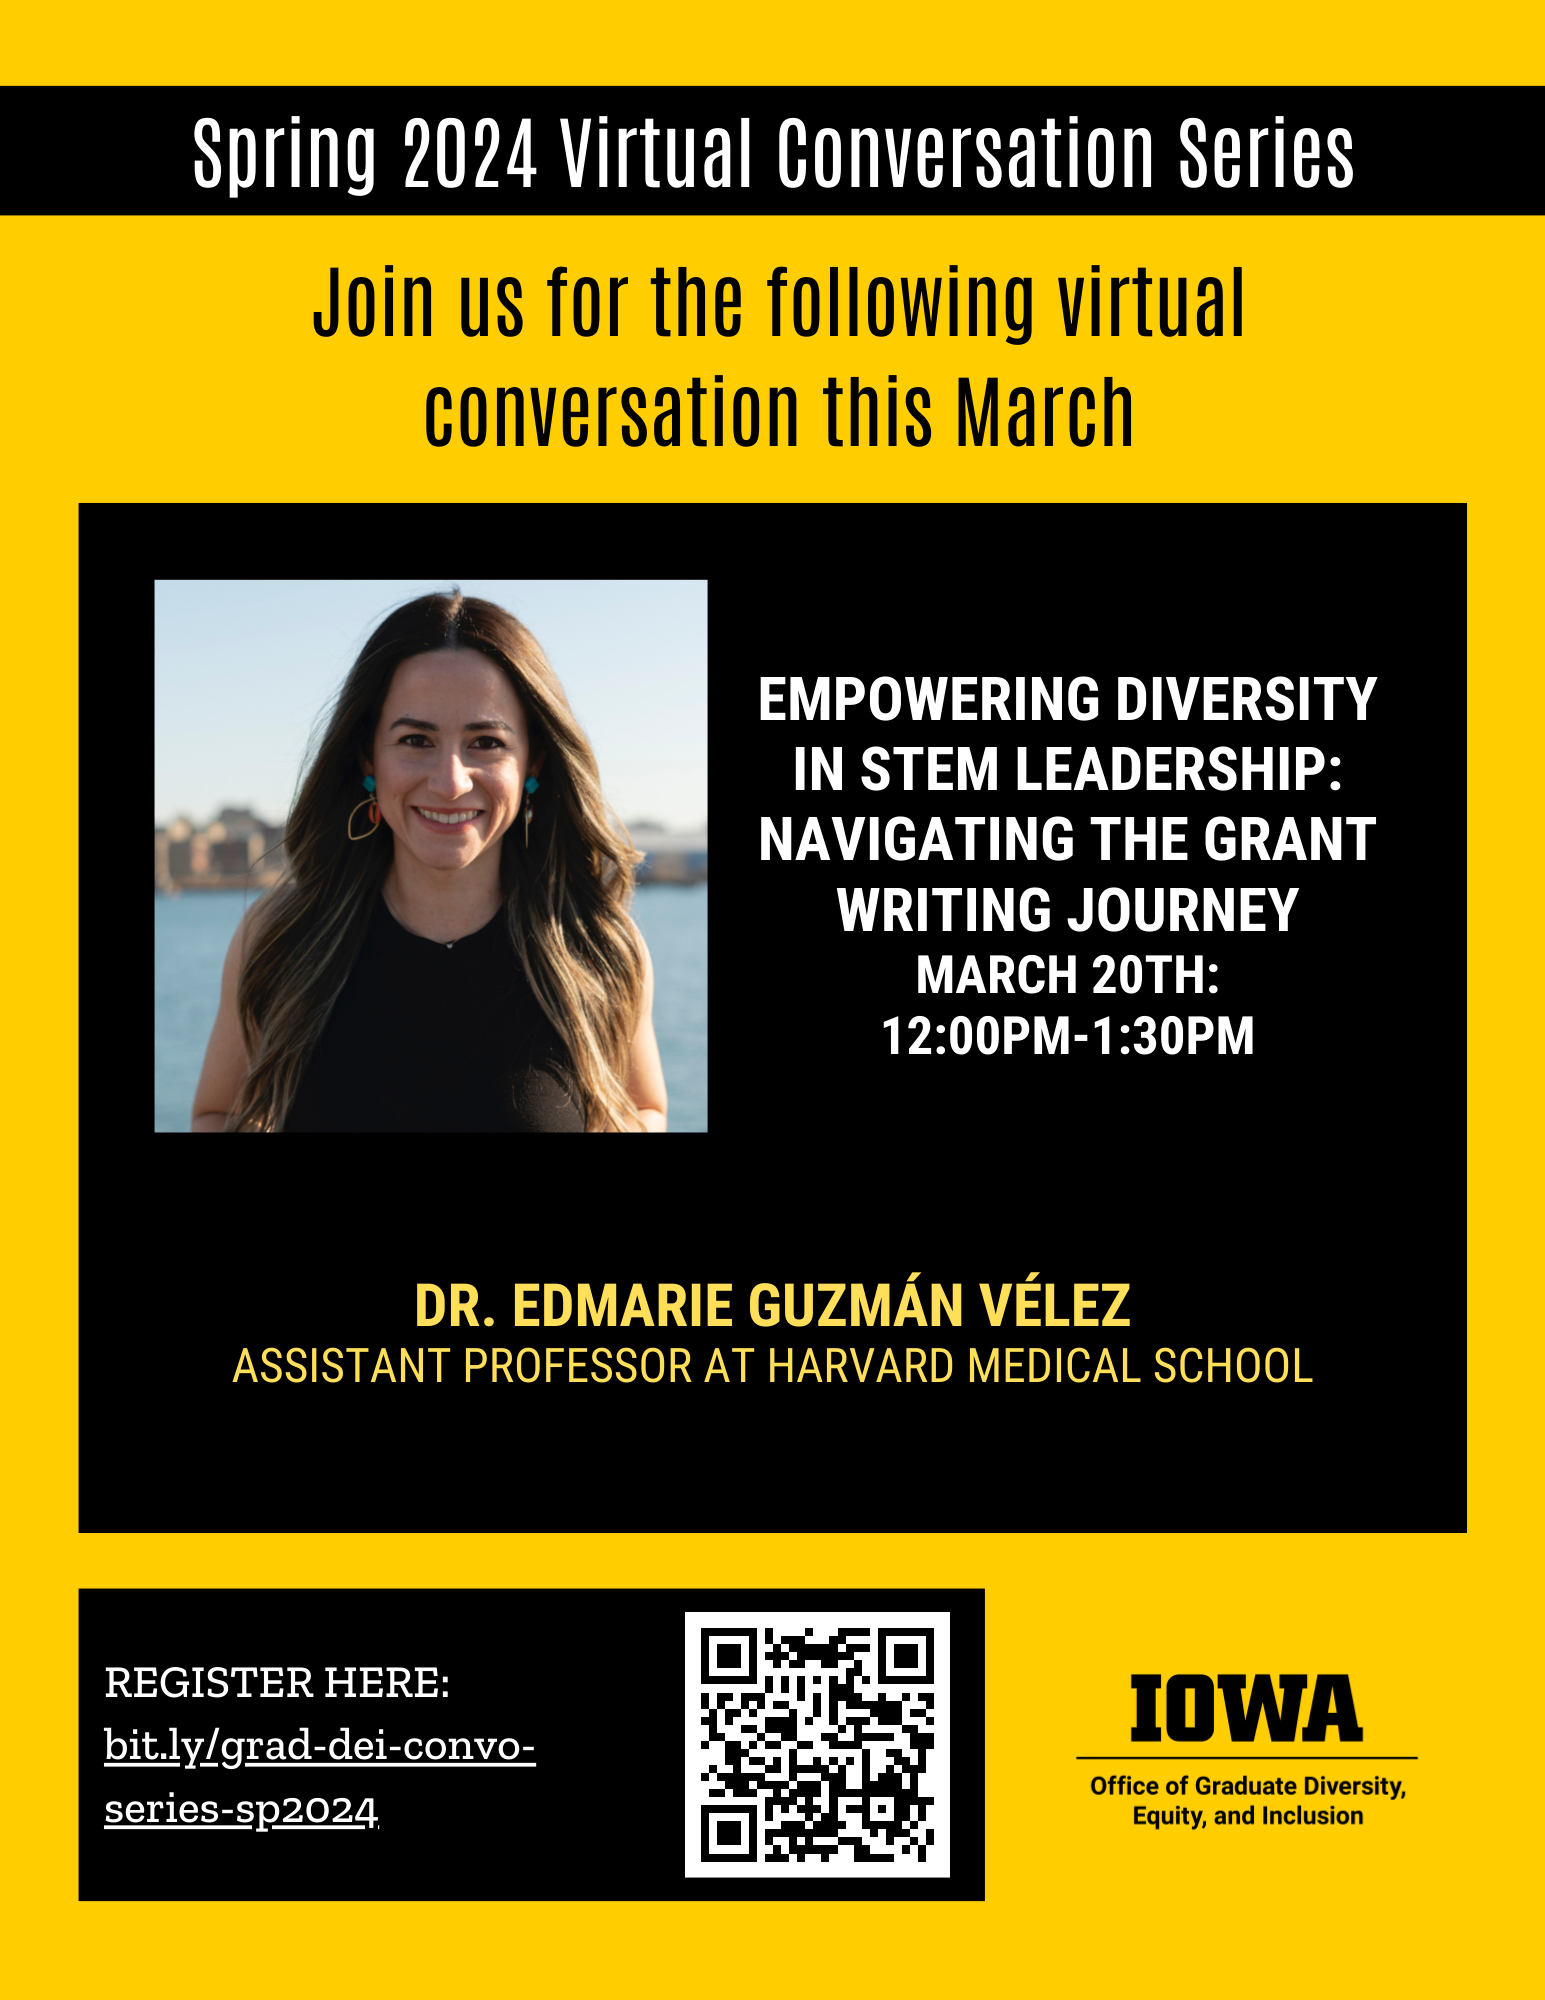 vertical flyer with picture of Dr. Edmarie Guzman-Velez on left. Text on right says "Empowering Diversity in STEM Leadership: Navigating the Grant Writing Journey March 20th: 12 - 1:30 PM